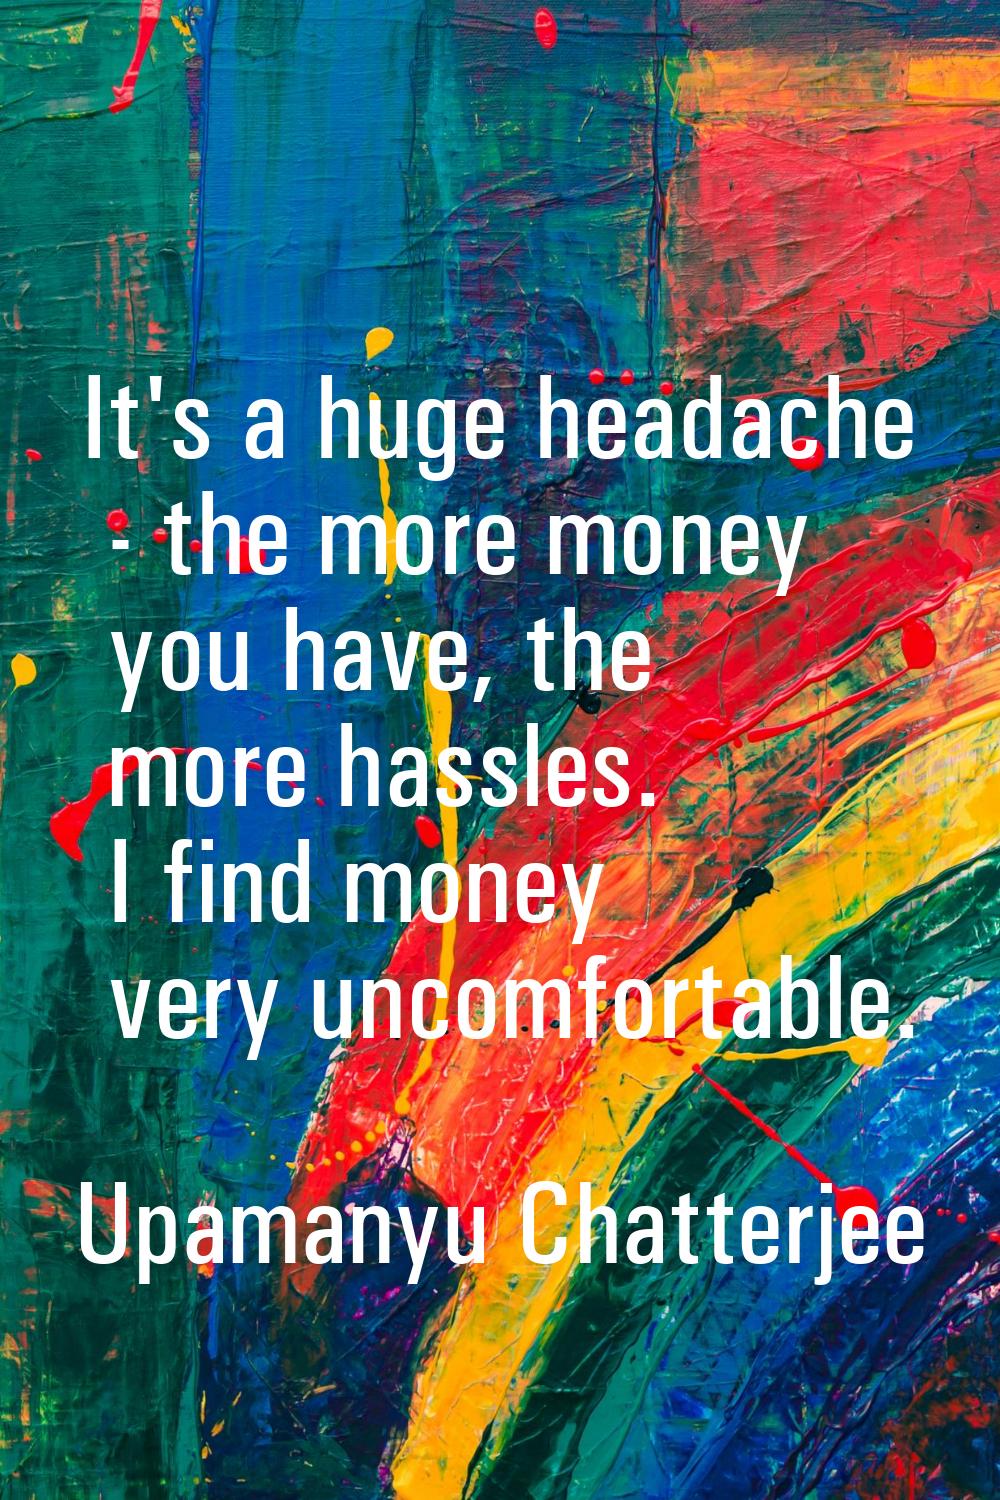 It's a huge headache - the more money you have, the more hassles. I find money very uncomfortable.